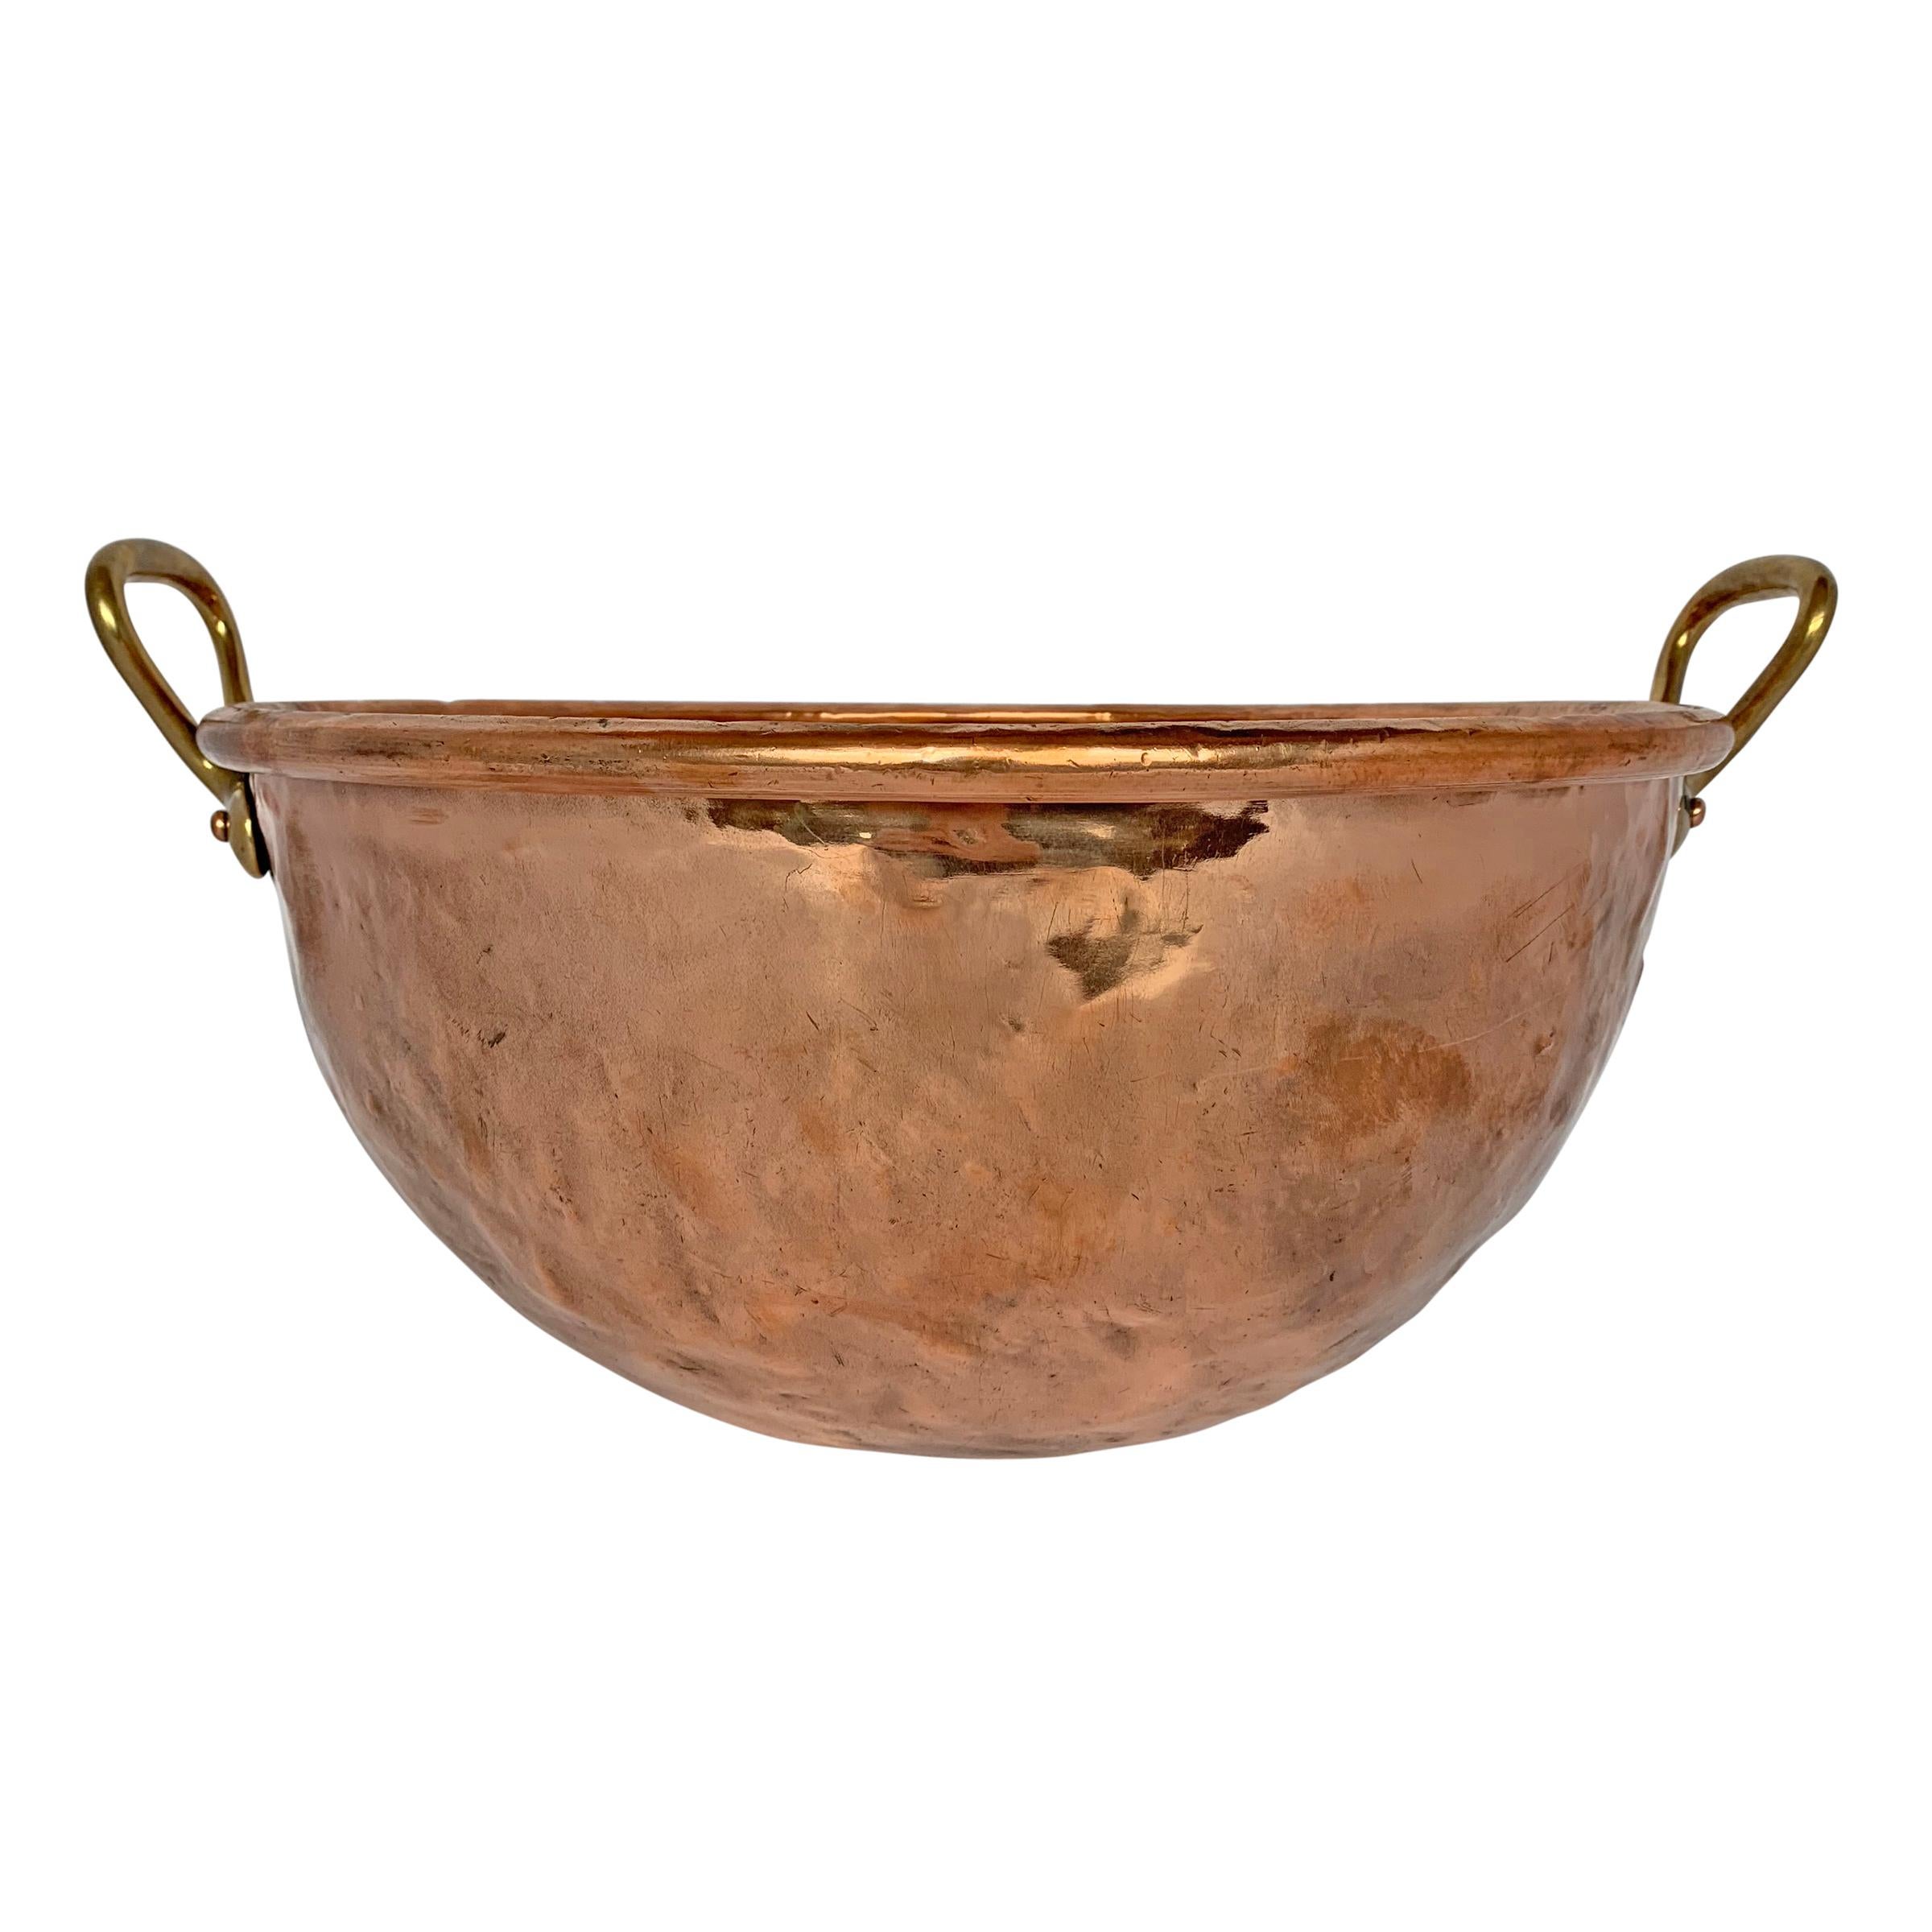 A fabulous and large early 20th century French copper confectioner's pot with large bronze handles and a wonderful patina. We think this would make a fantastic vessel sink in a kitchen and/or powder room.